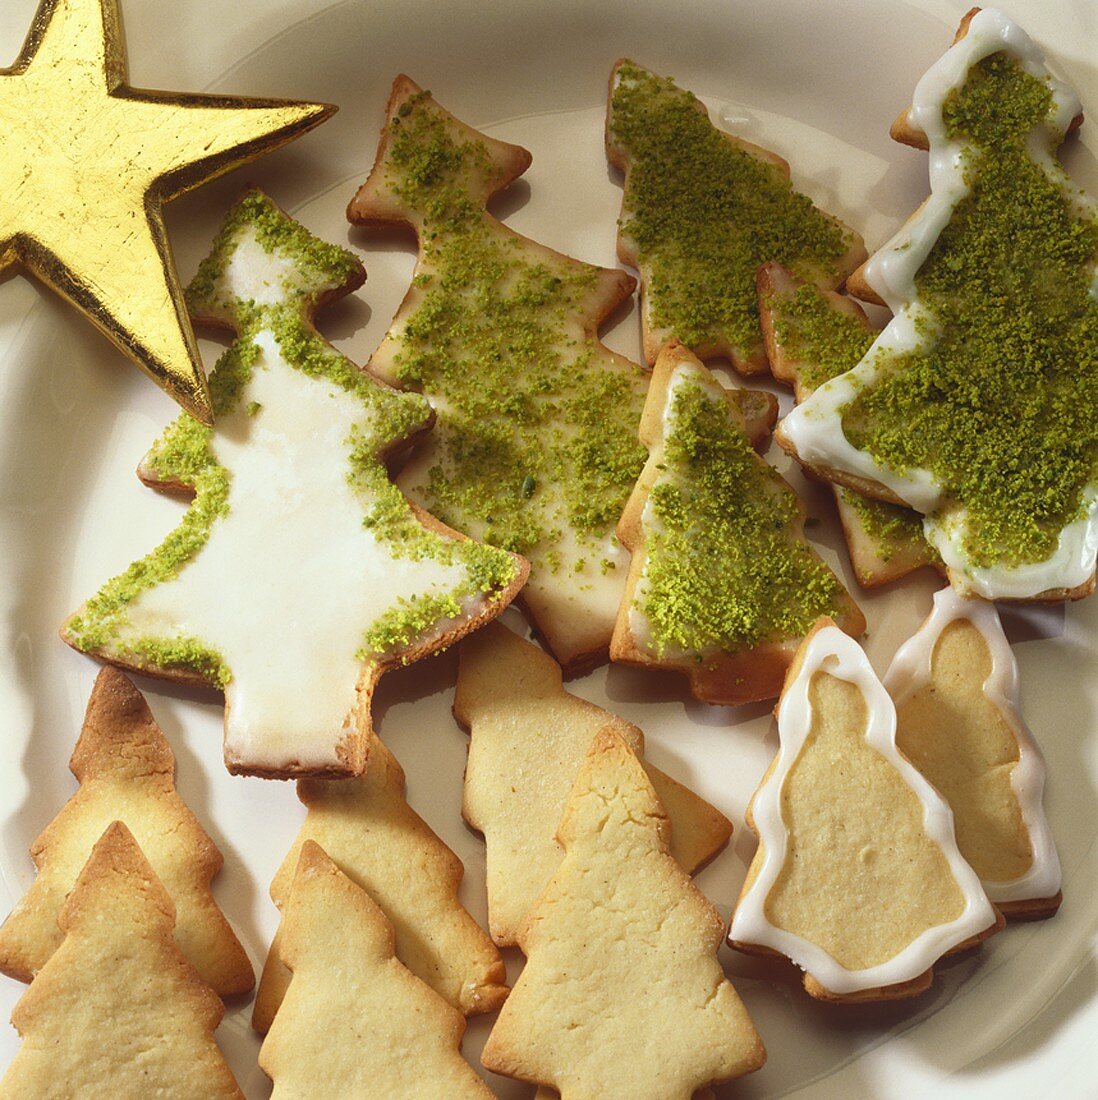 Biscuits in shape of Christmas trees with icing & pistachios